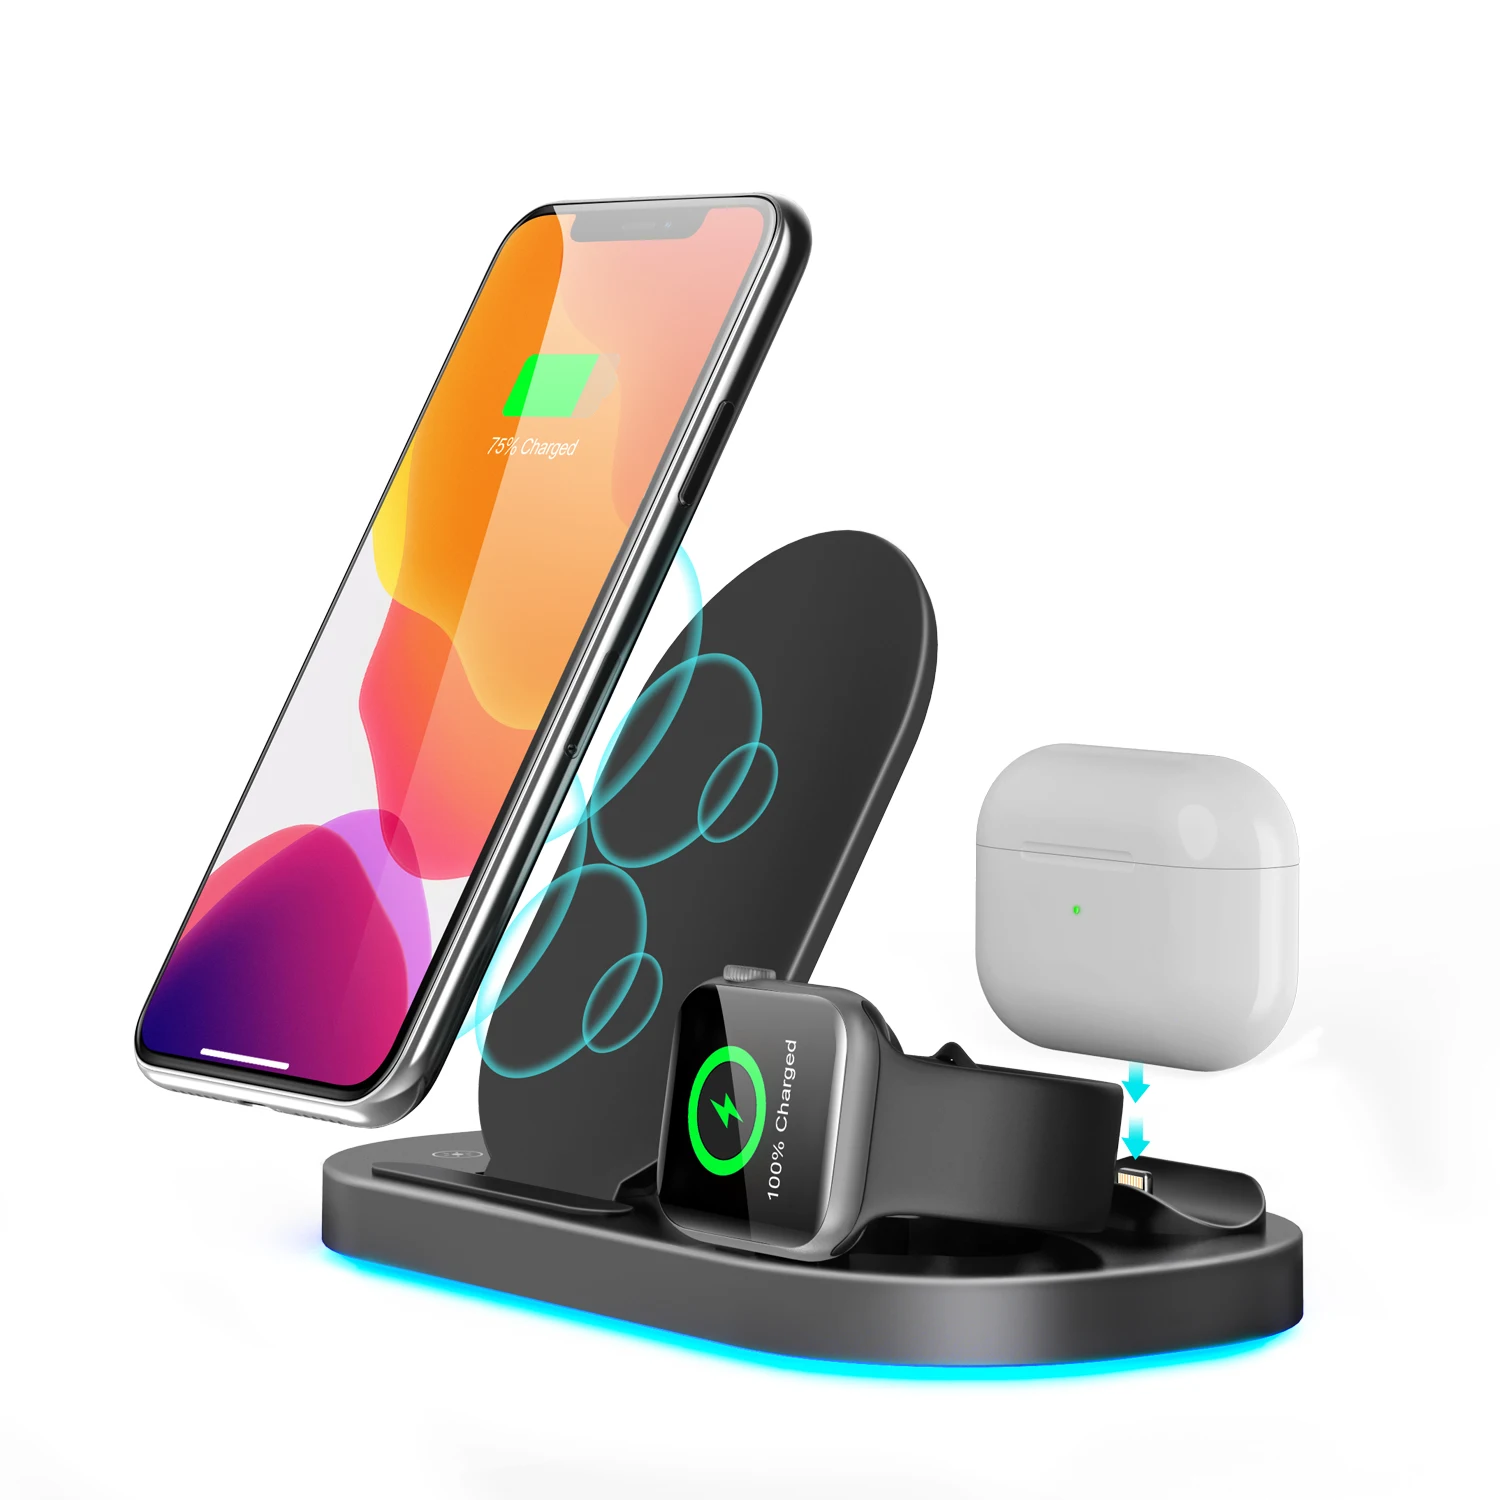 

NEW OEM Multi Wireless Charger Foldable 3 in 1 Wireless Charging Station Phone Watch Charger for iPhone Cellphone, Black, white